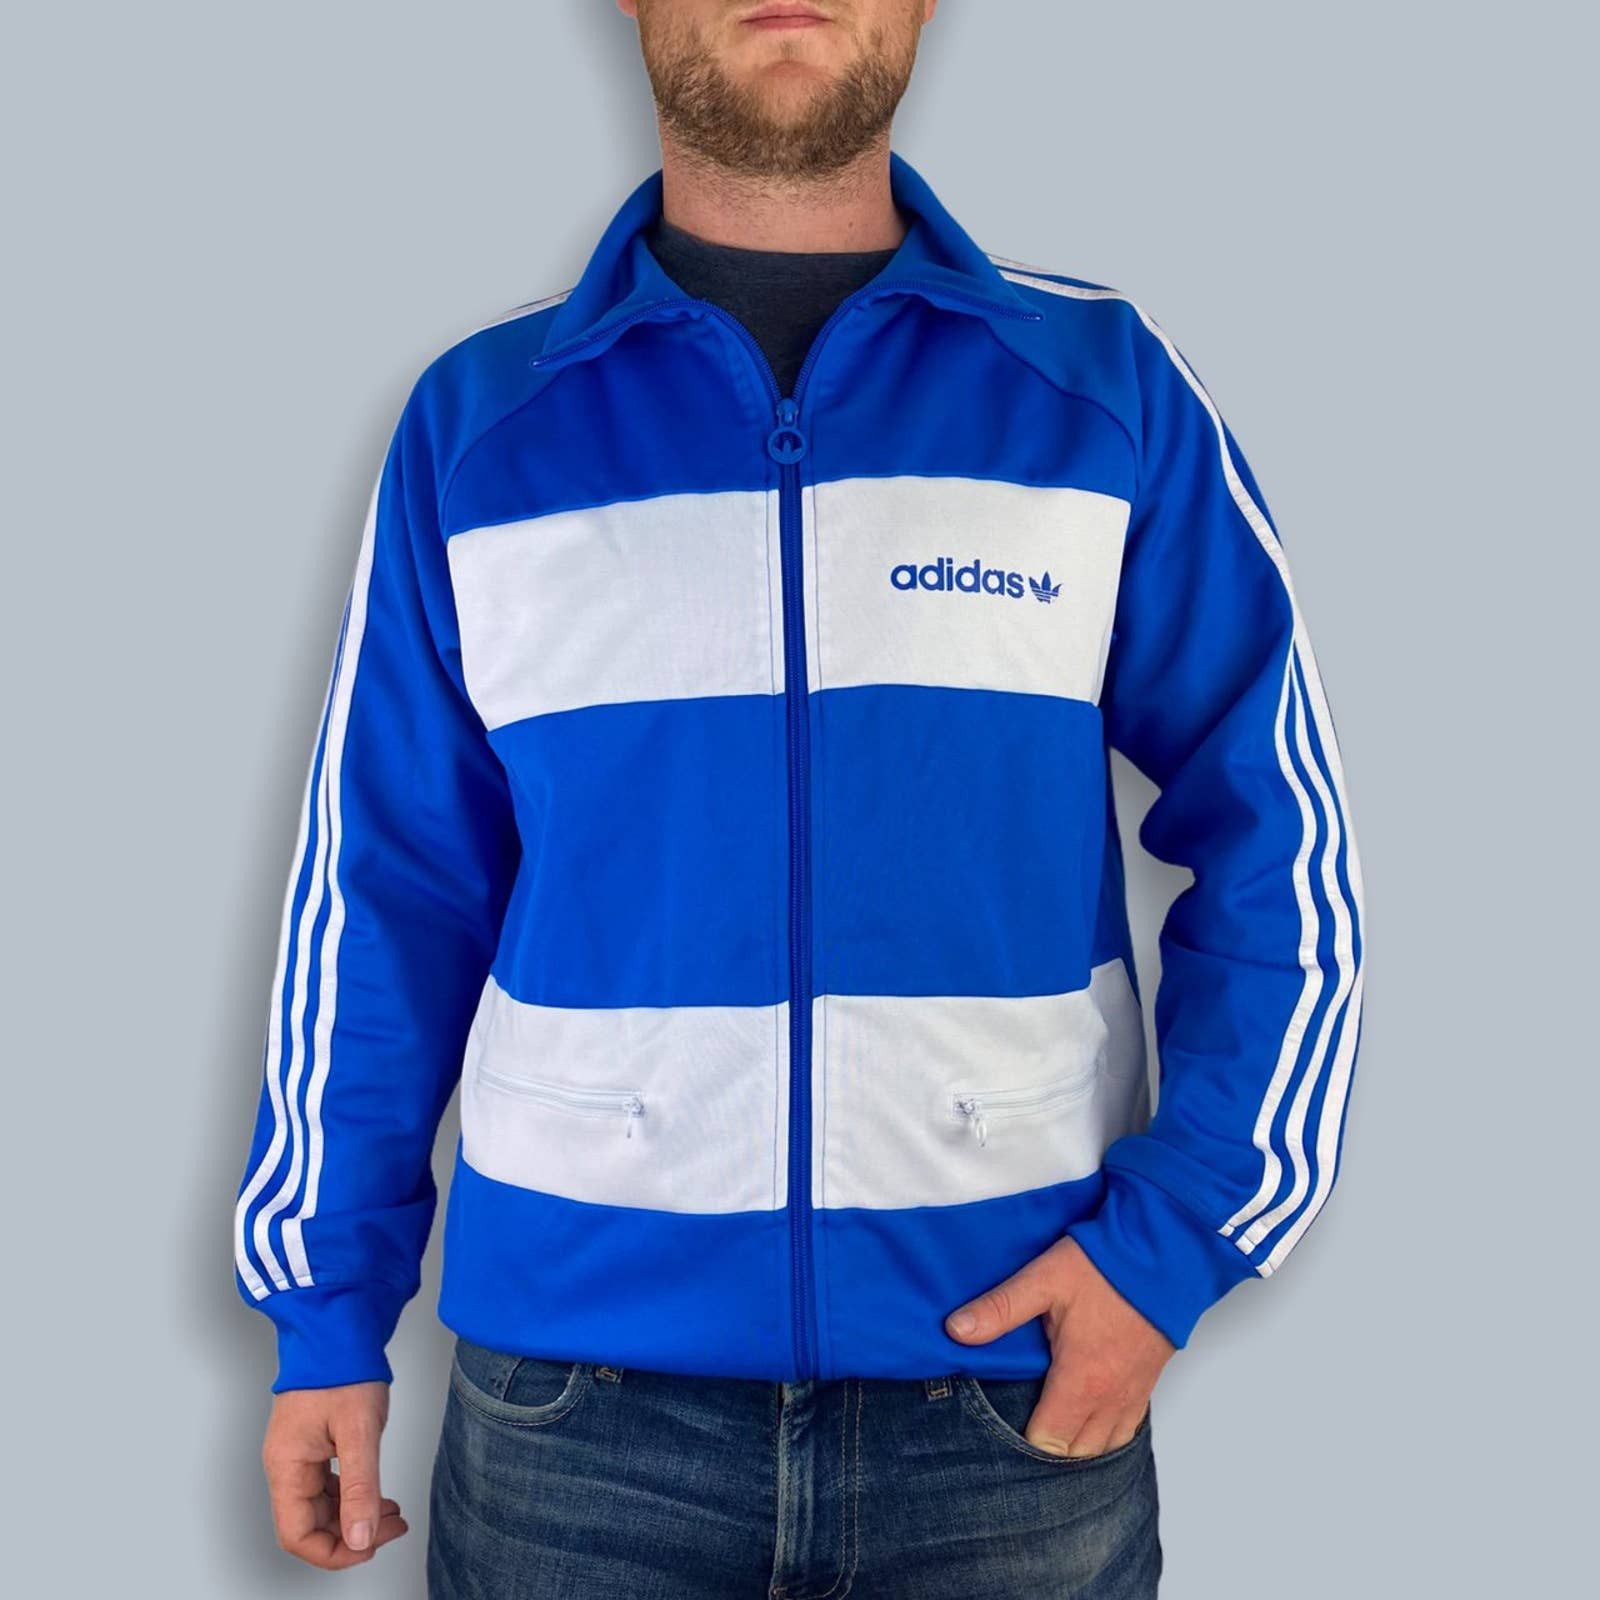 Adidas Retro Blue and White Striped Adidas Zip-up Sweater (M) Size US M / EU 48-50 / 2 - 2 Preview